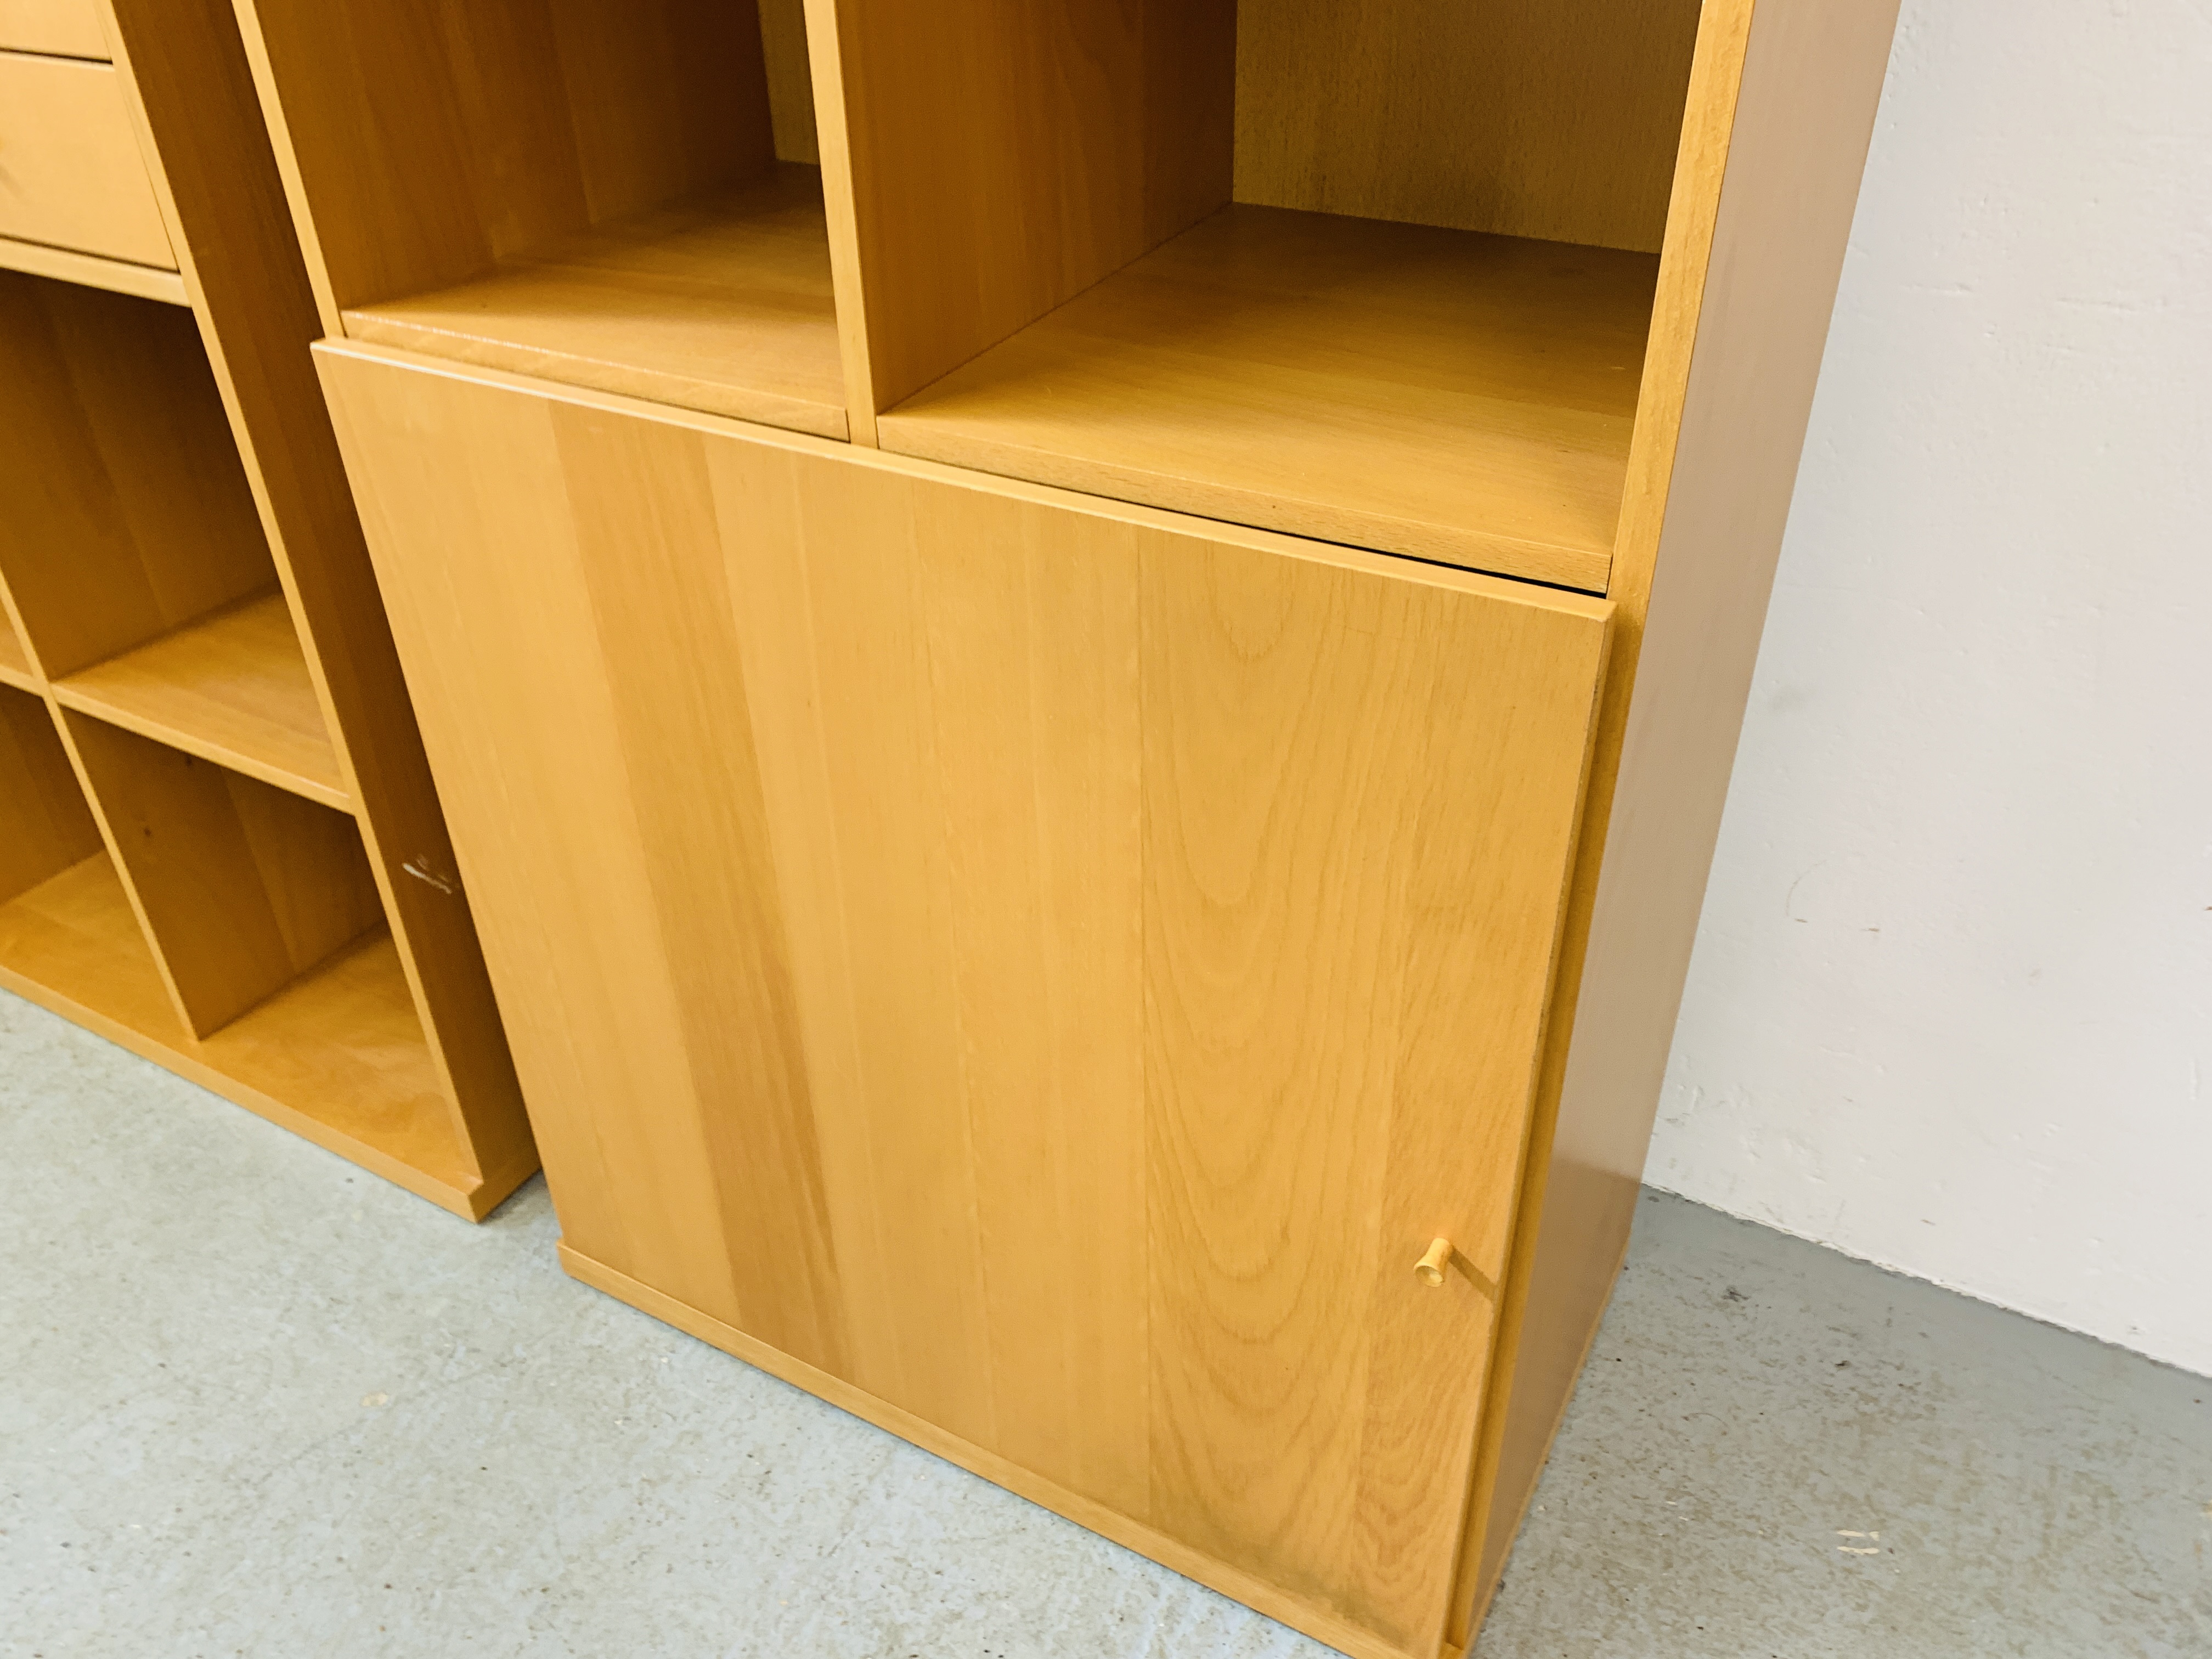 TWO MODERN BEECHWOOD FINISH HOME STORAGE UNITS EACH WIDTH 72CM. DEPTH 42CM. HEIGHT 146CM. - Image 8 of 9